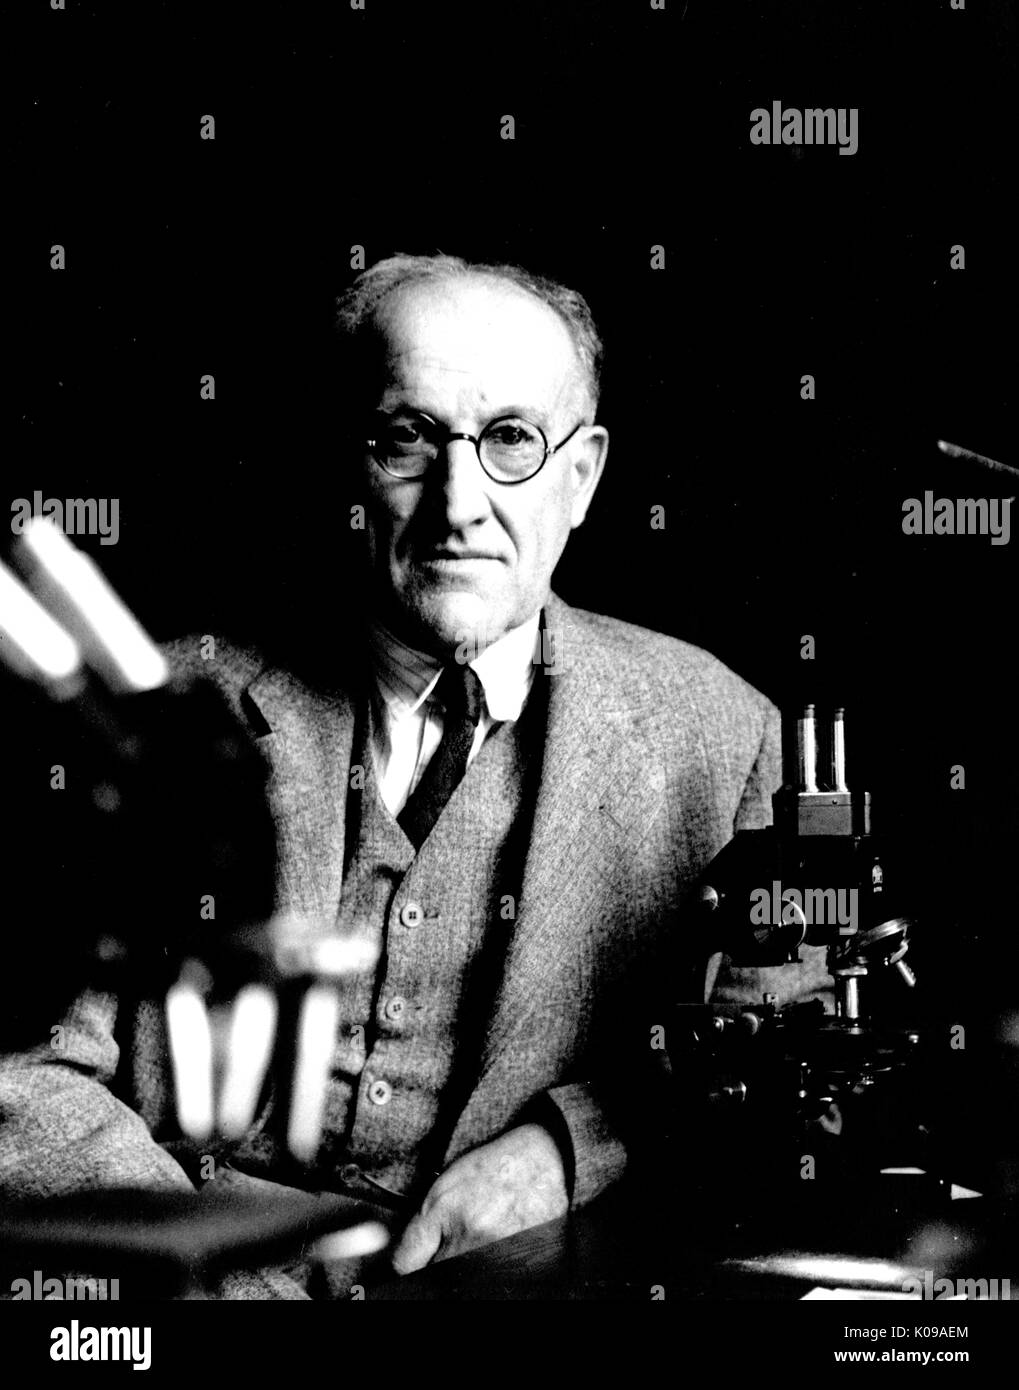 Half-length photograph of Dr. Samuel Mast, biology faculty member at the Johns Hopkins University, sitting behind a wooden desk, wearing a dark three piece suit and circular glasses, a microscope and other instruments on the table in front of him, with a serious facial expression. 1937. Stock Photo